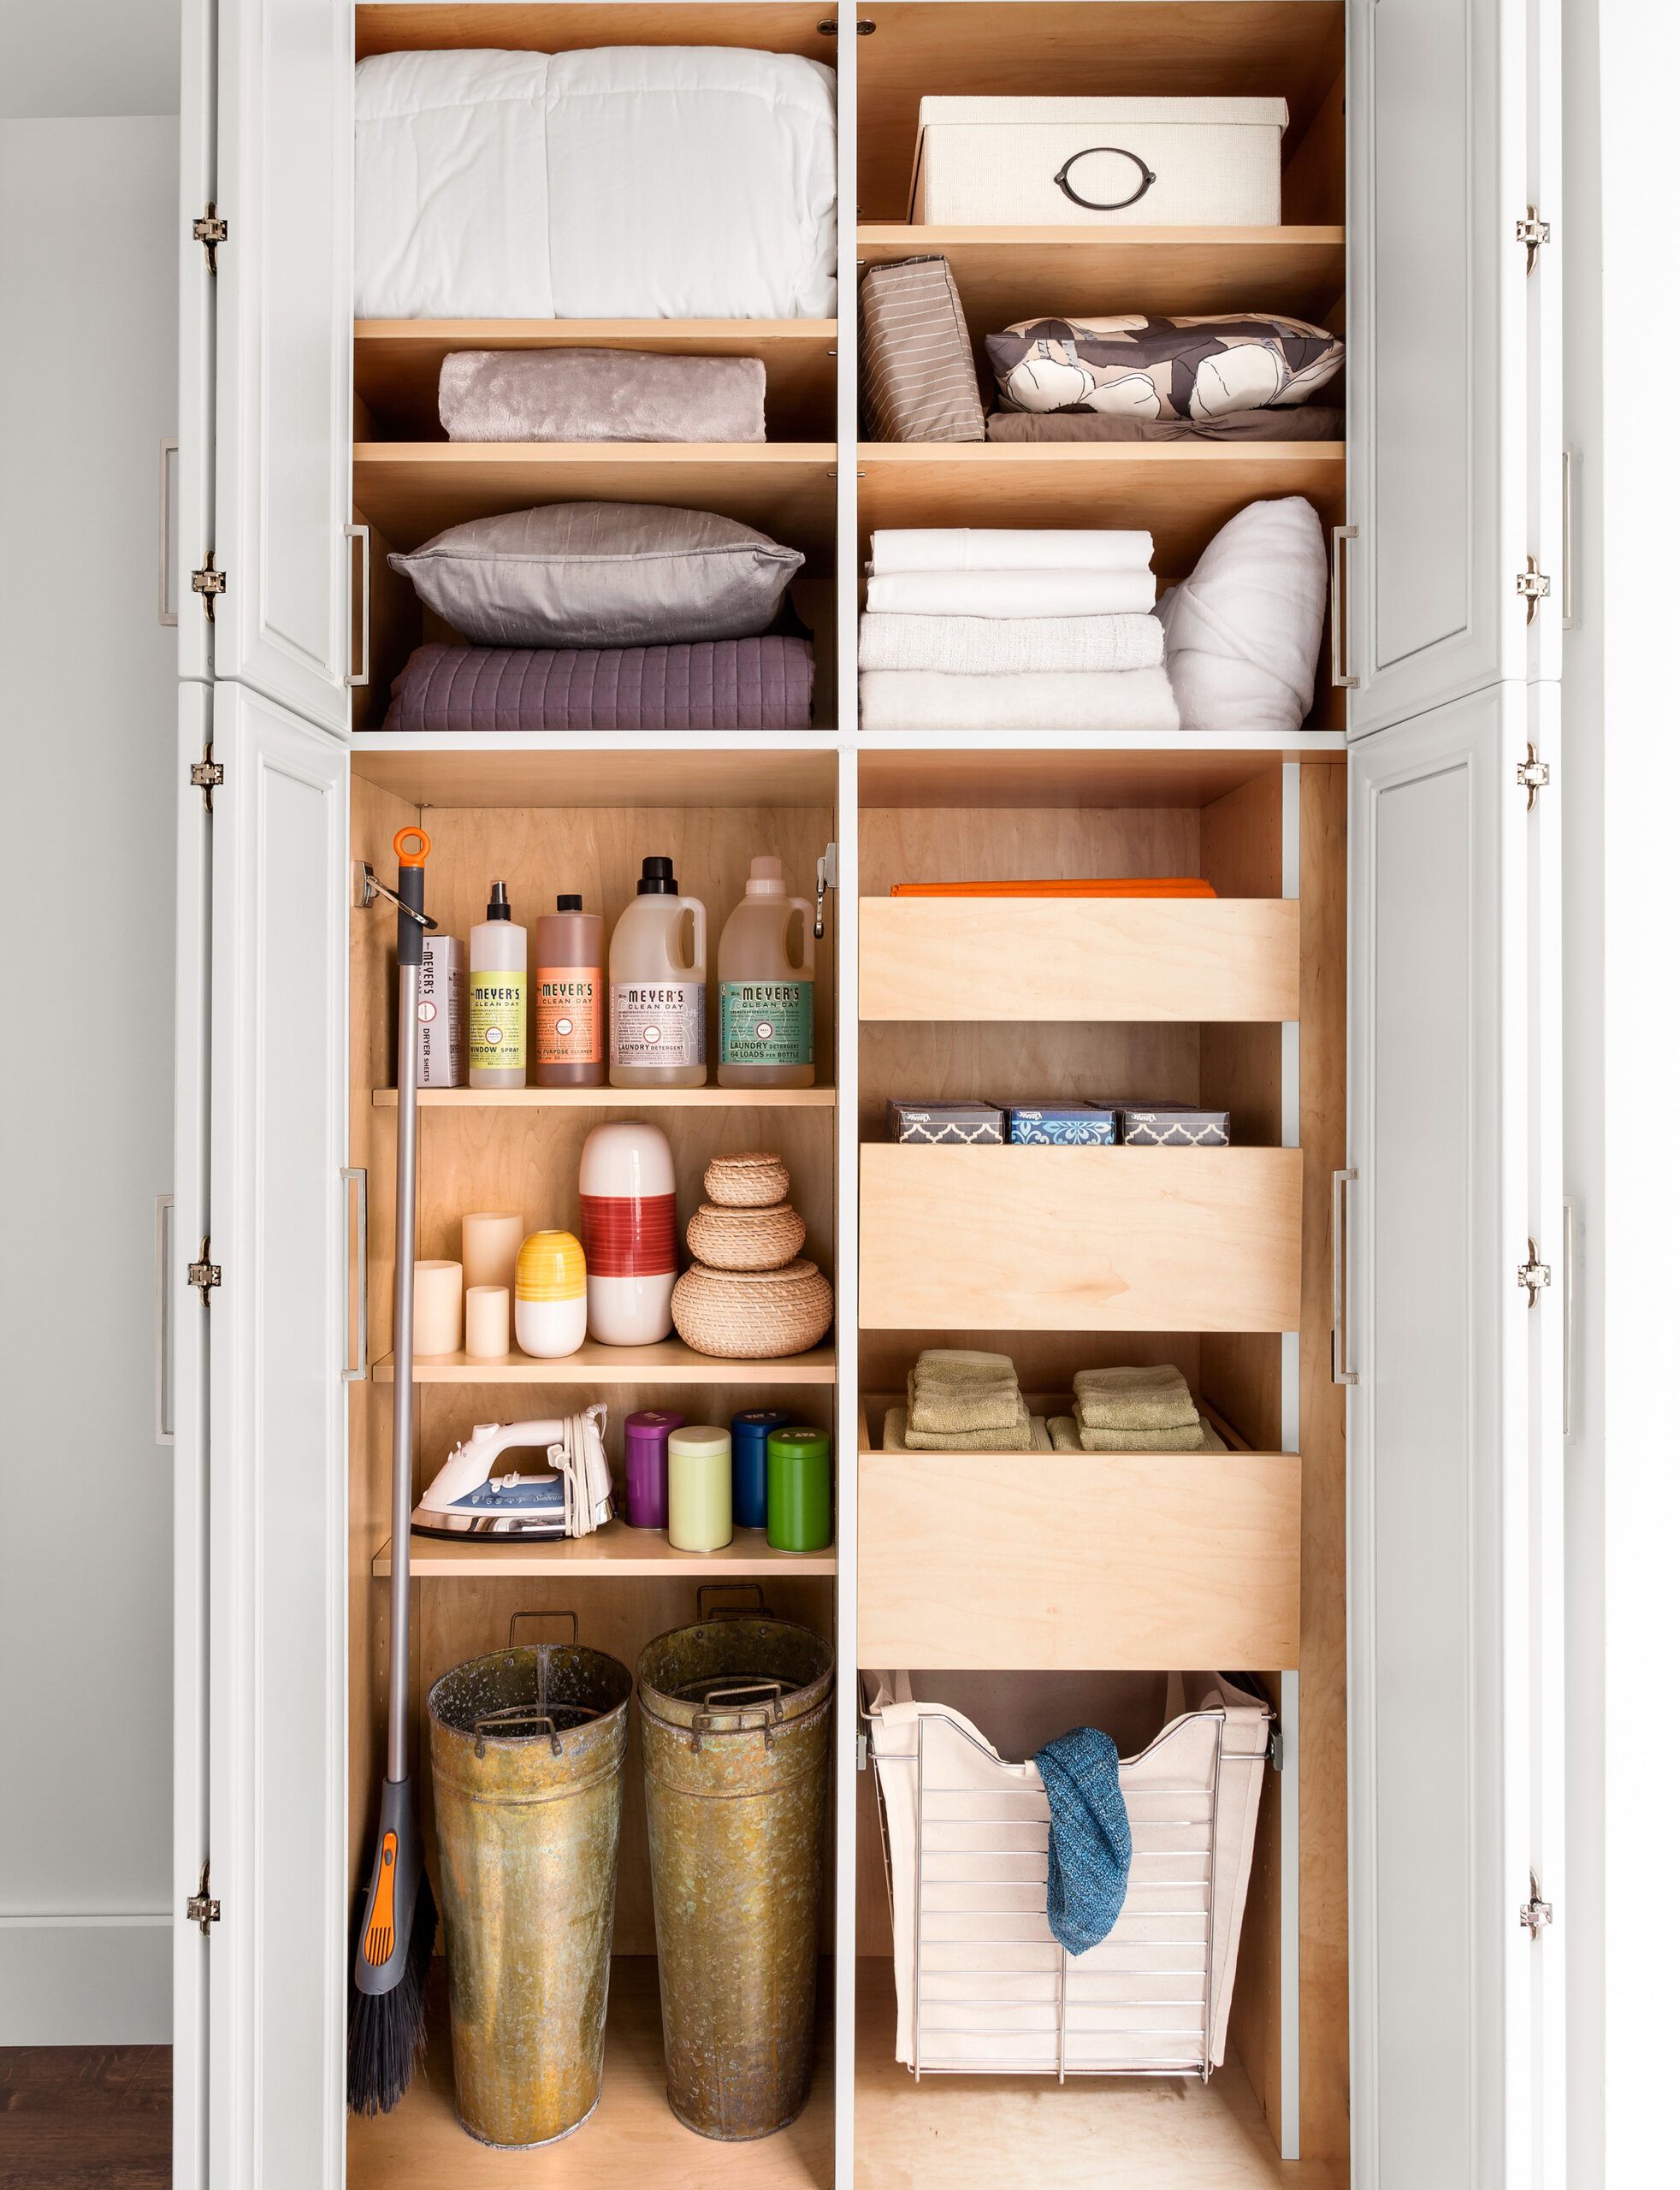 Making Room in the Linen Closet with Ziploc® Space Bags®